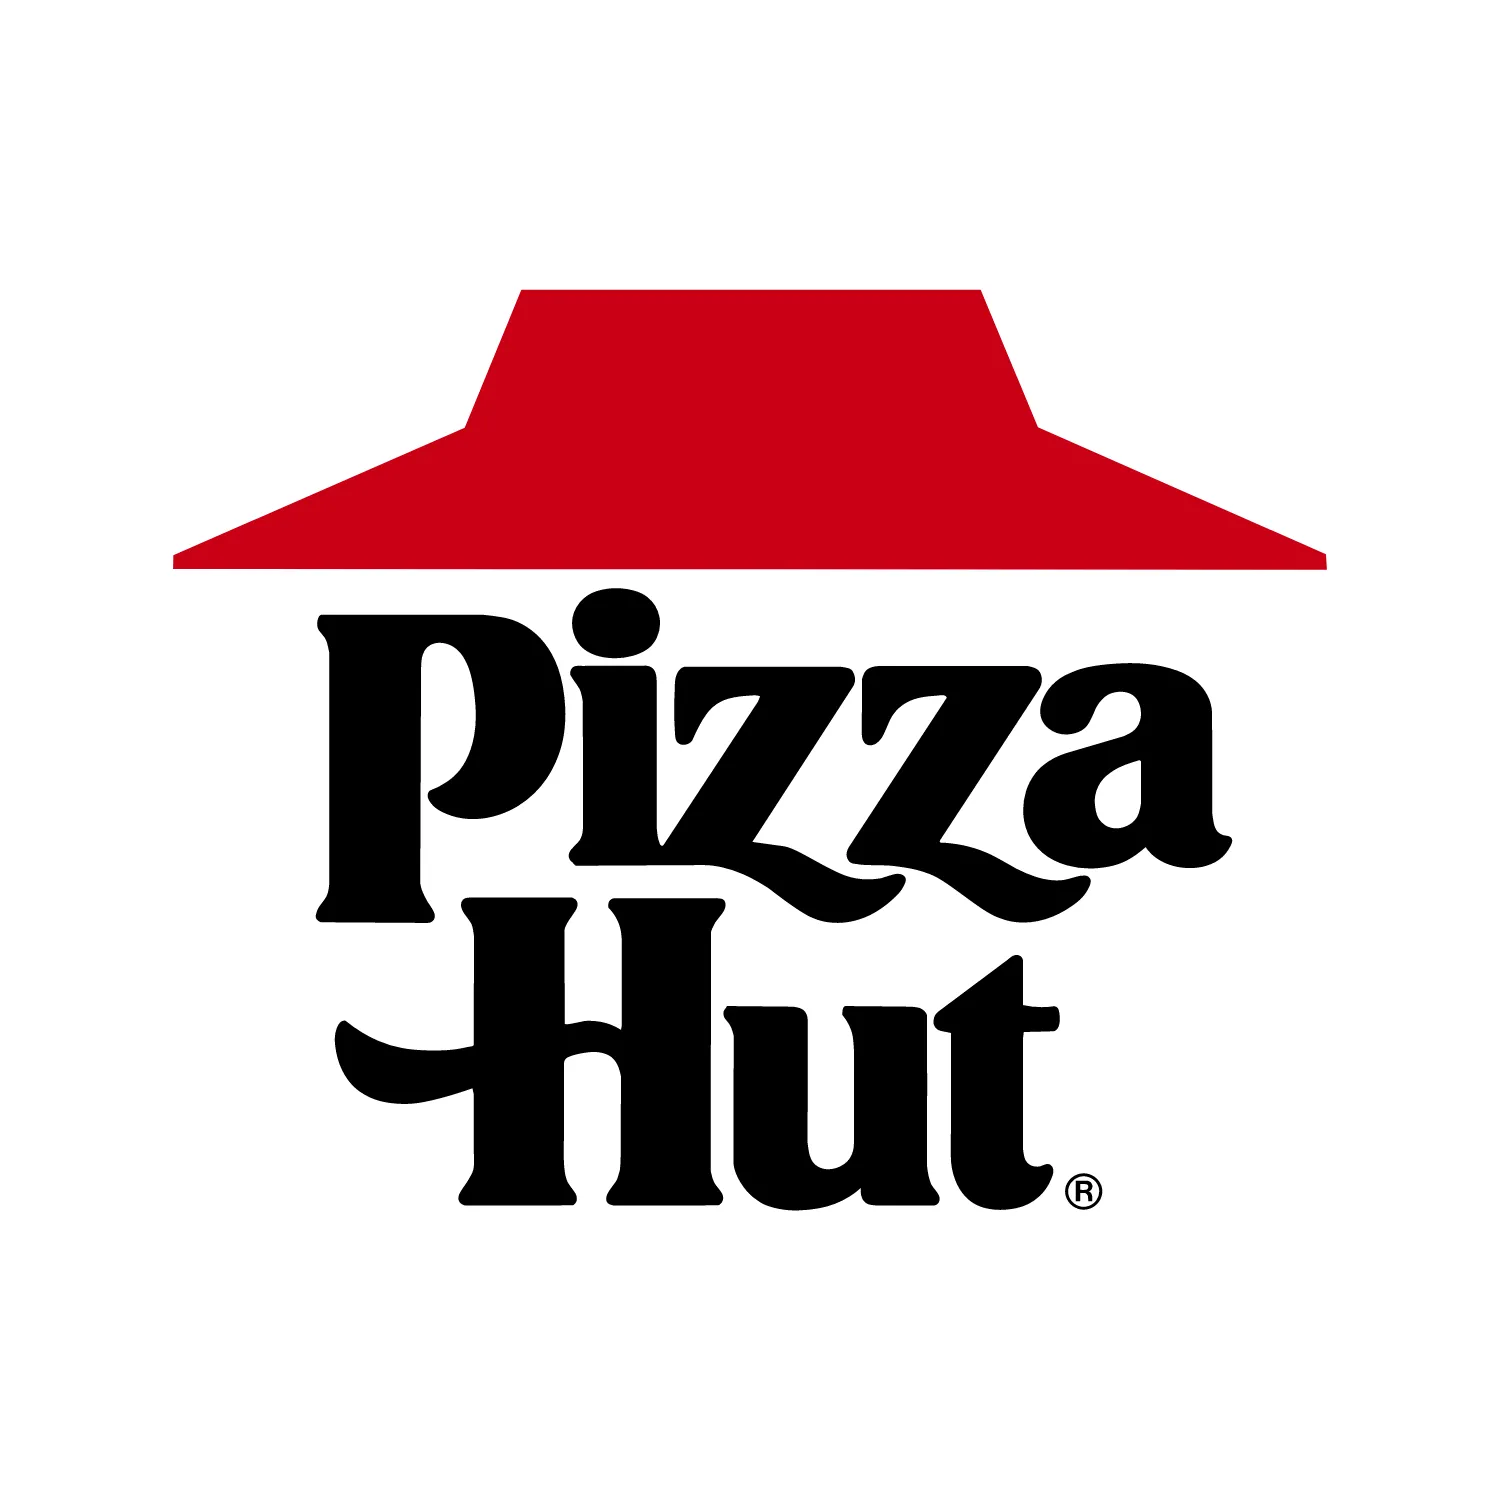 Database of Pizza Hut Locations in the United States